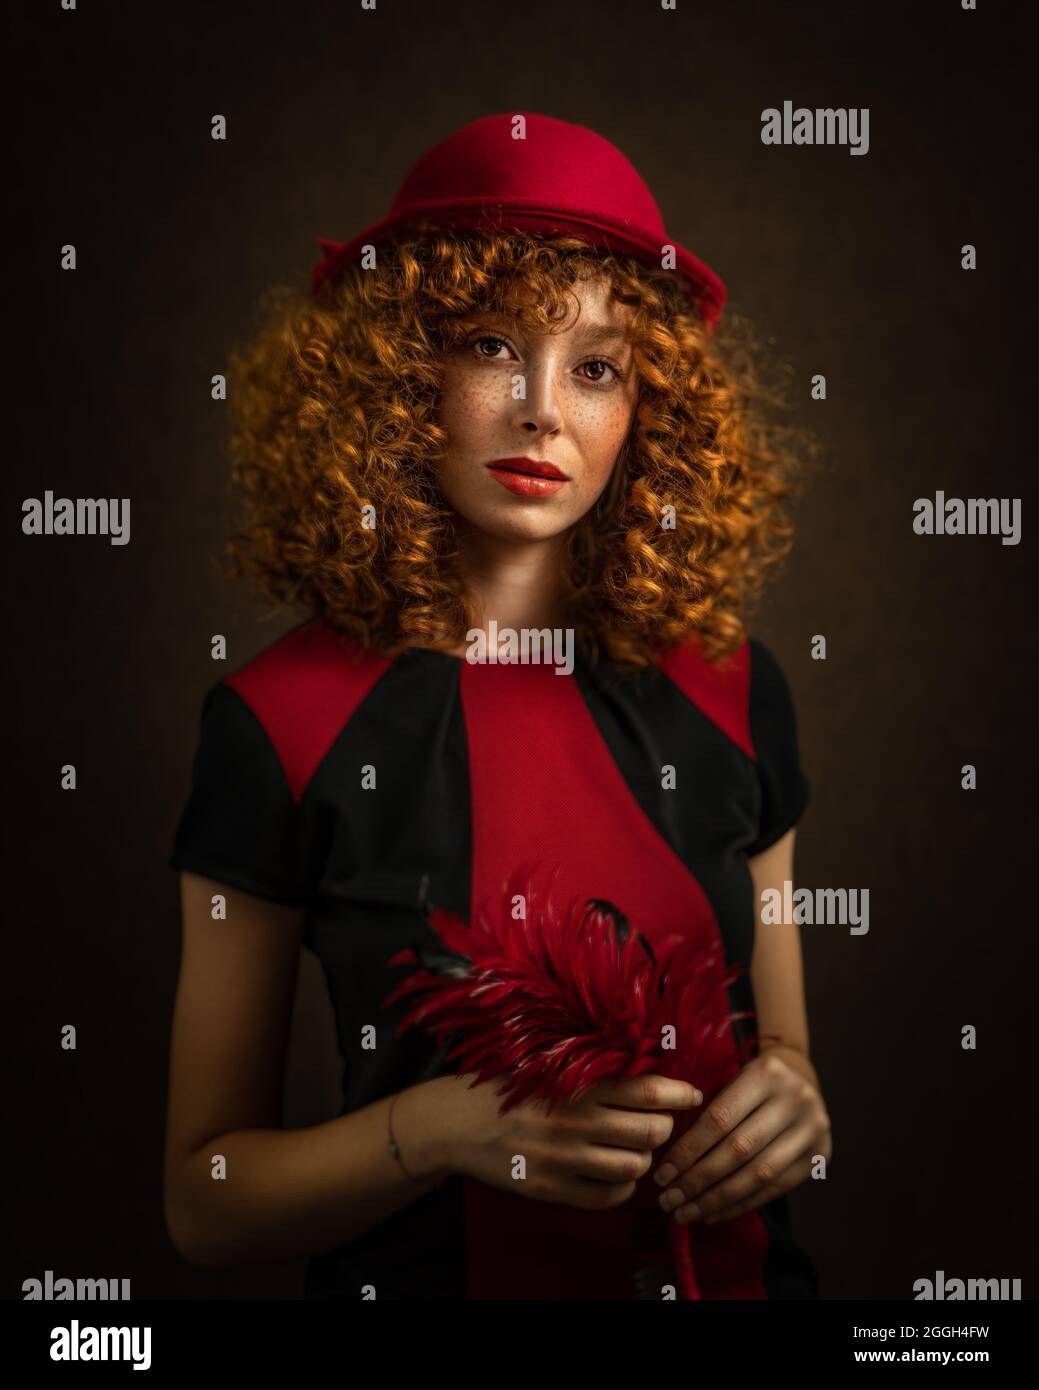 Portrait of a beautiful woman with nostalgic red and black 1940's style outfit and hairstyle on dark background. High quality photo Stock Photo